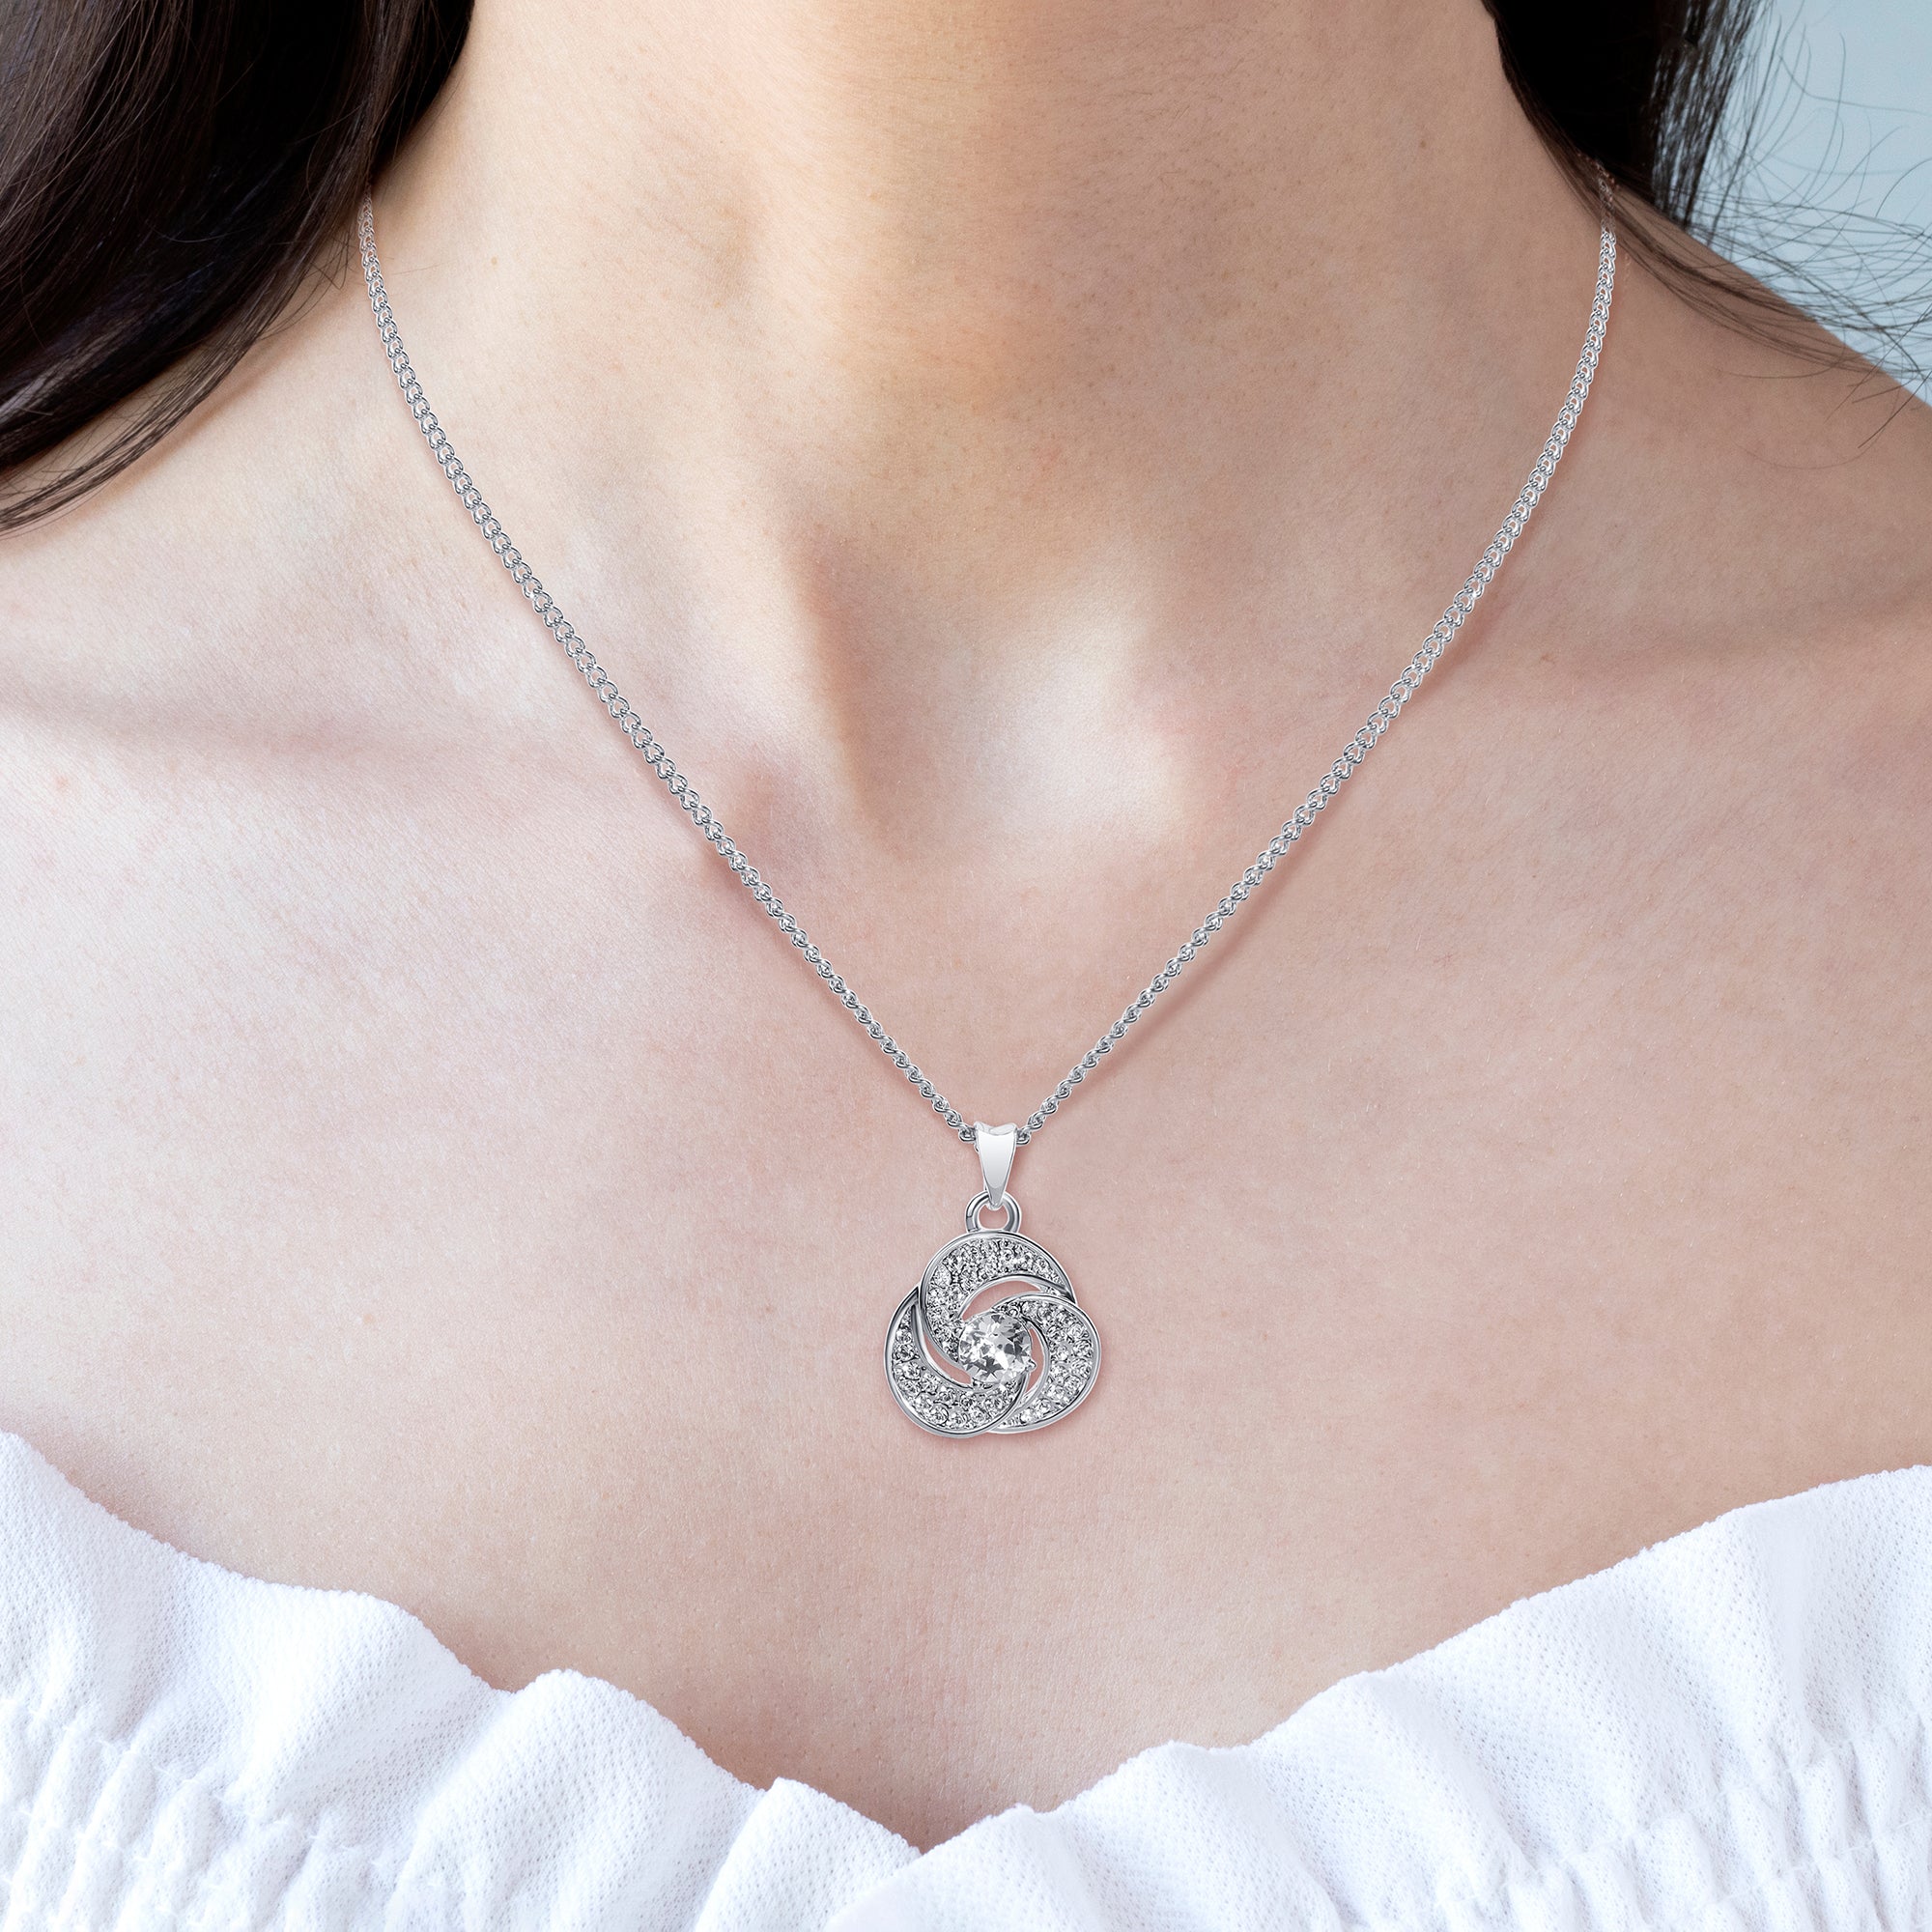 To My Daughter - I Will Always Be There - Tryndi Love Knot Necklace